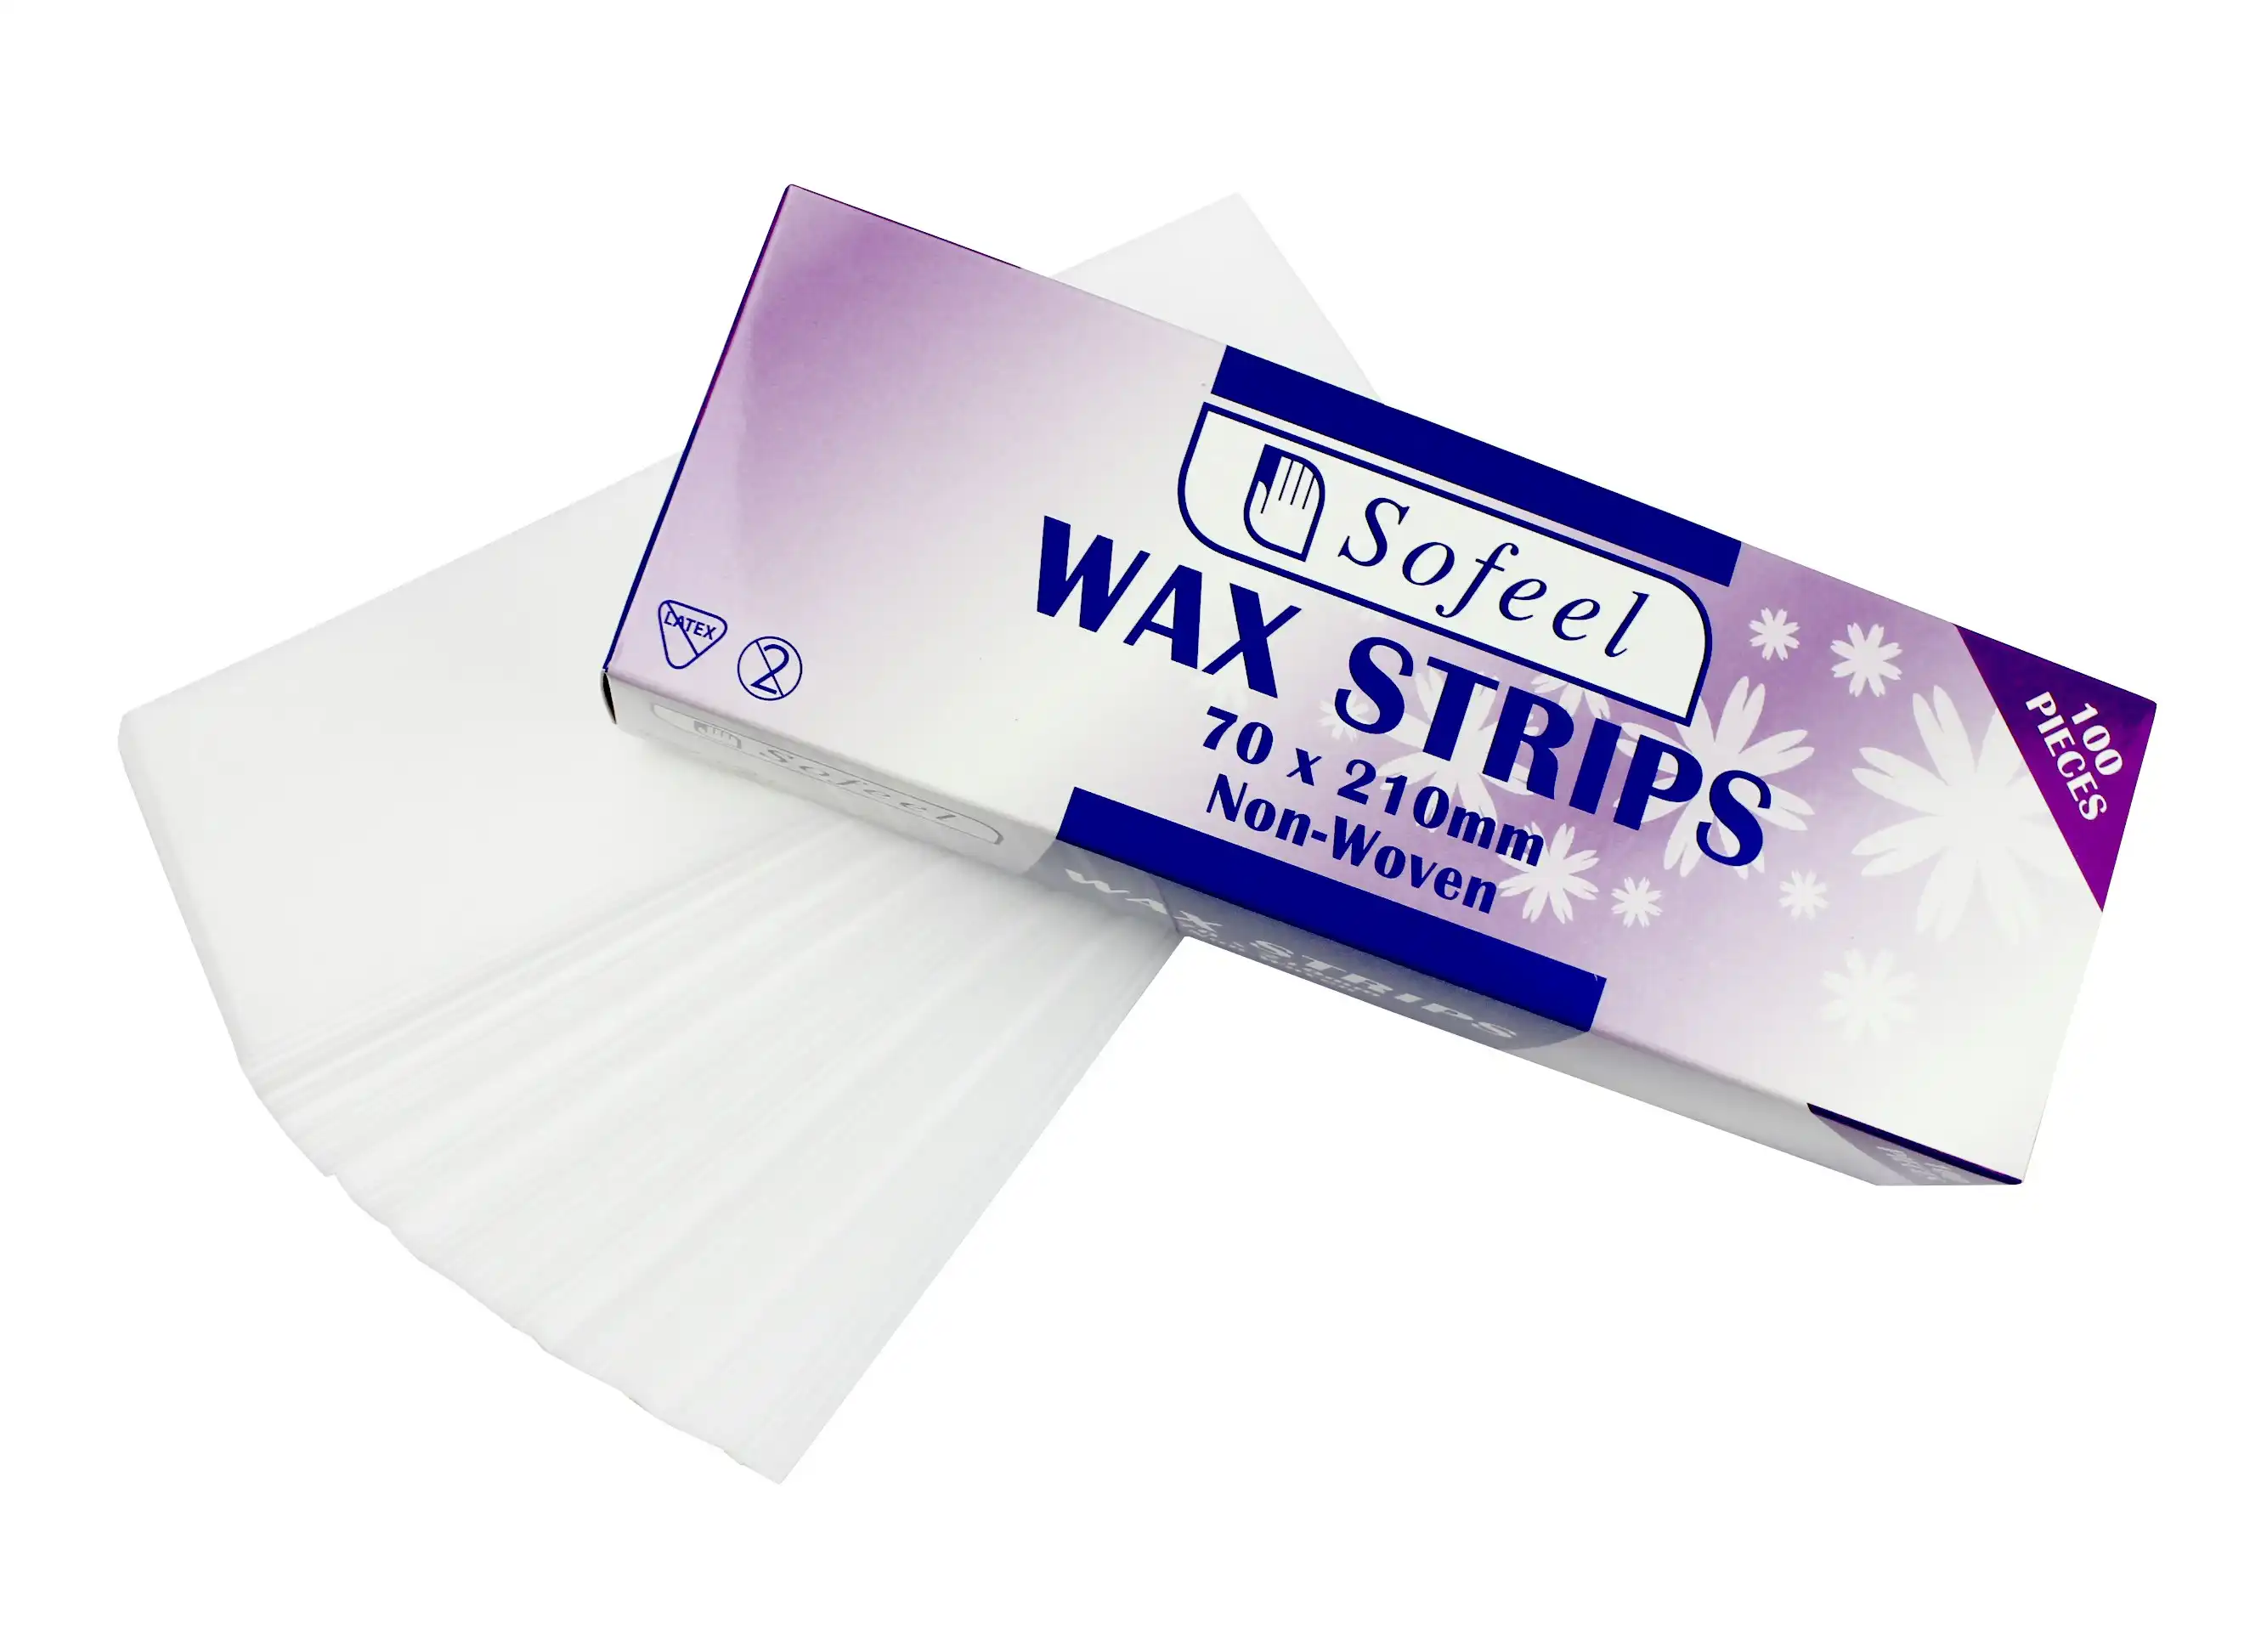 Sofeel Wax Strips Non Woven 7 x 21 cm 100 Pack